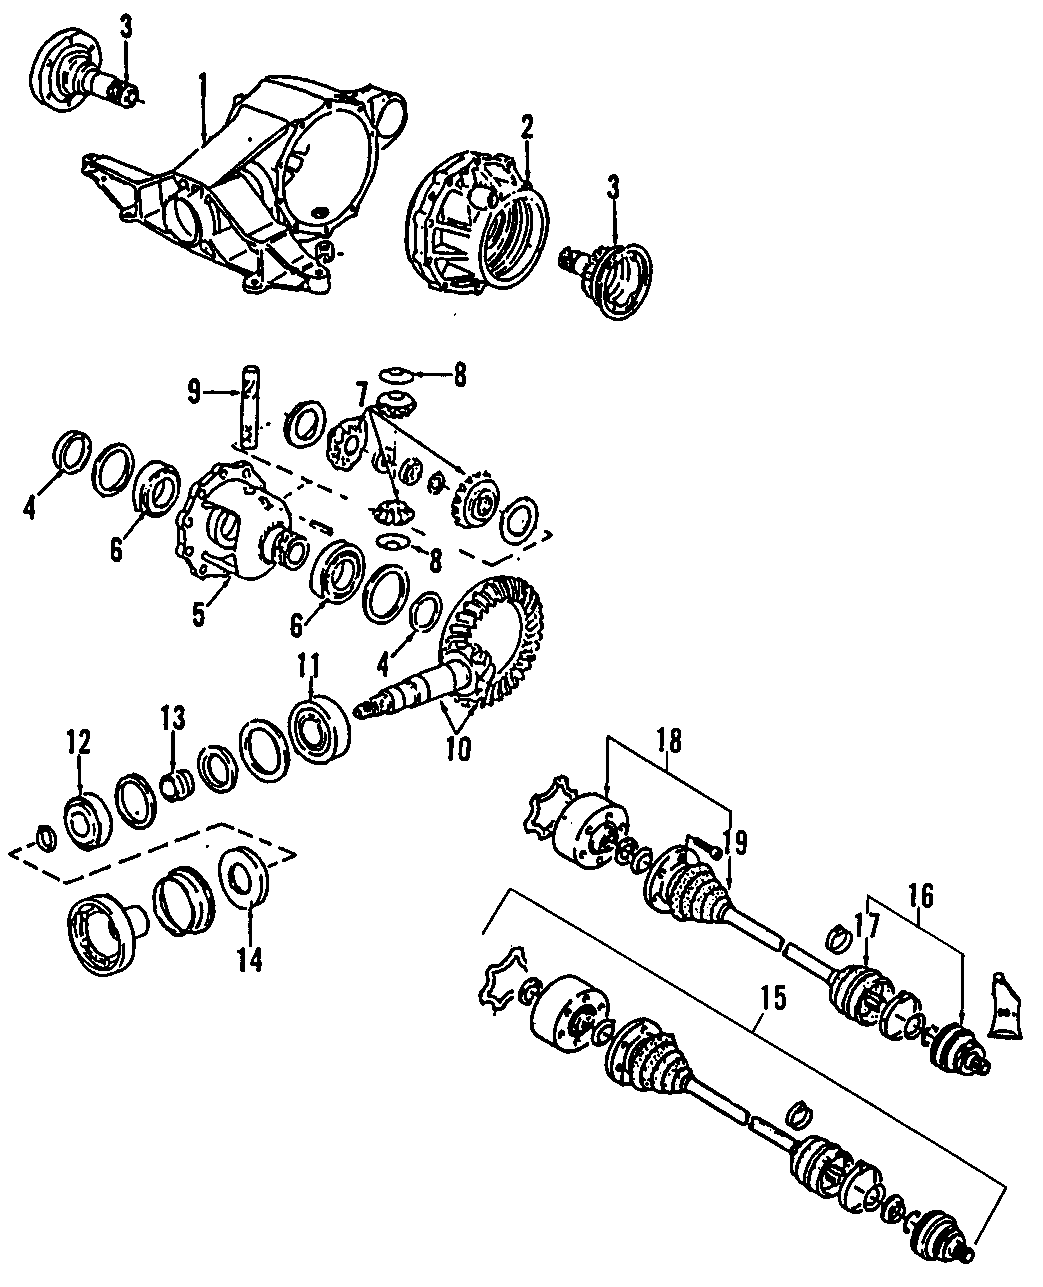 1DRIVE AXLES. REAR AXLE. AXLE SHAFTS & JOINTS. DIFFERENTIAL. PROPELLER SHAFT.https://images.simplepart.com/images/parts/motor/fullsize/F207090.png